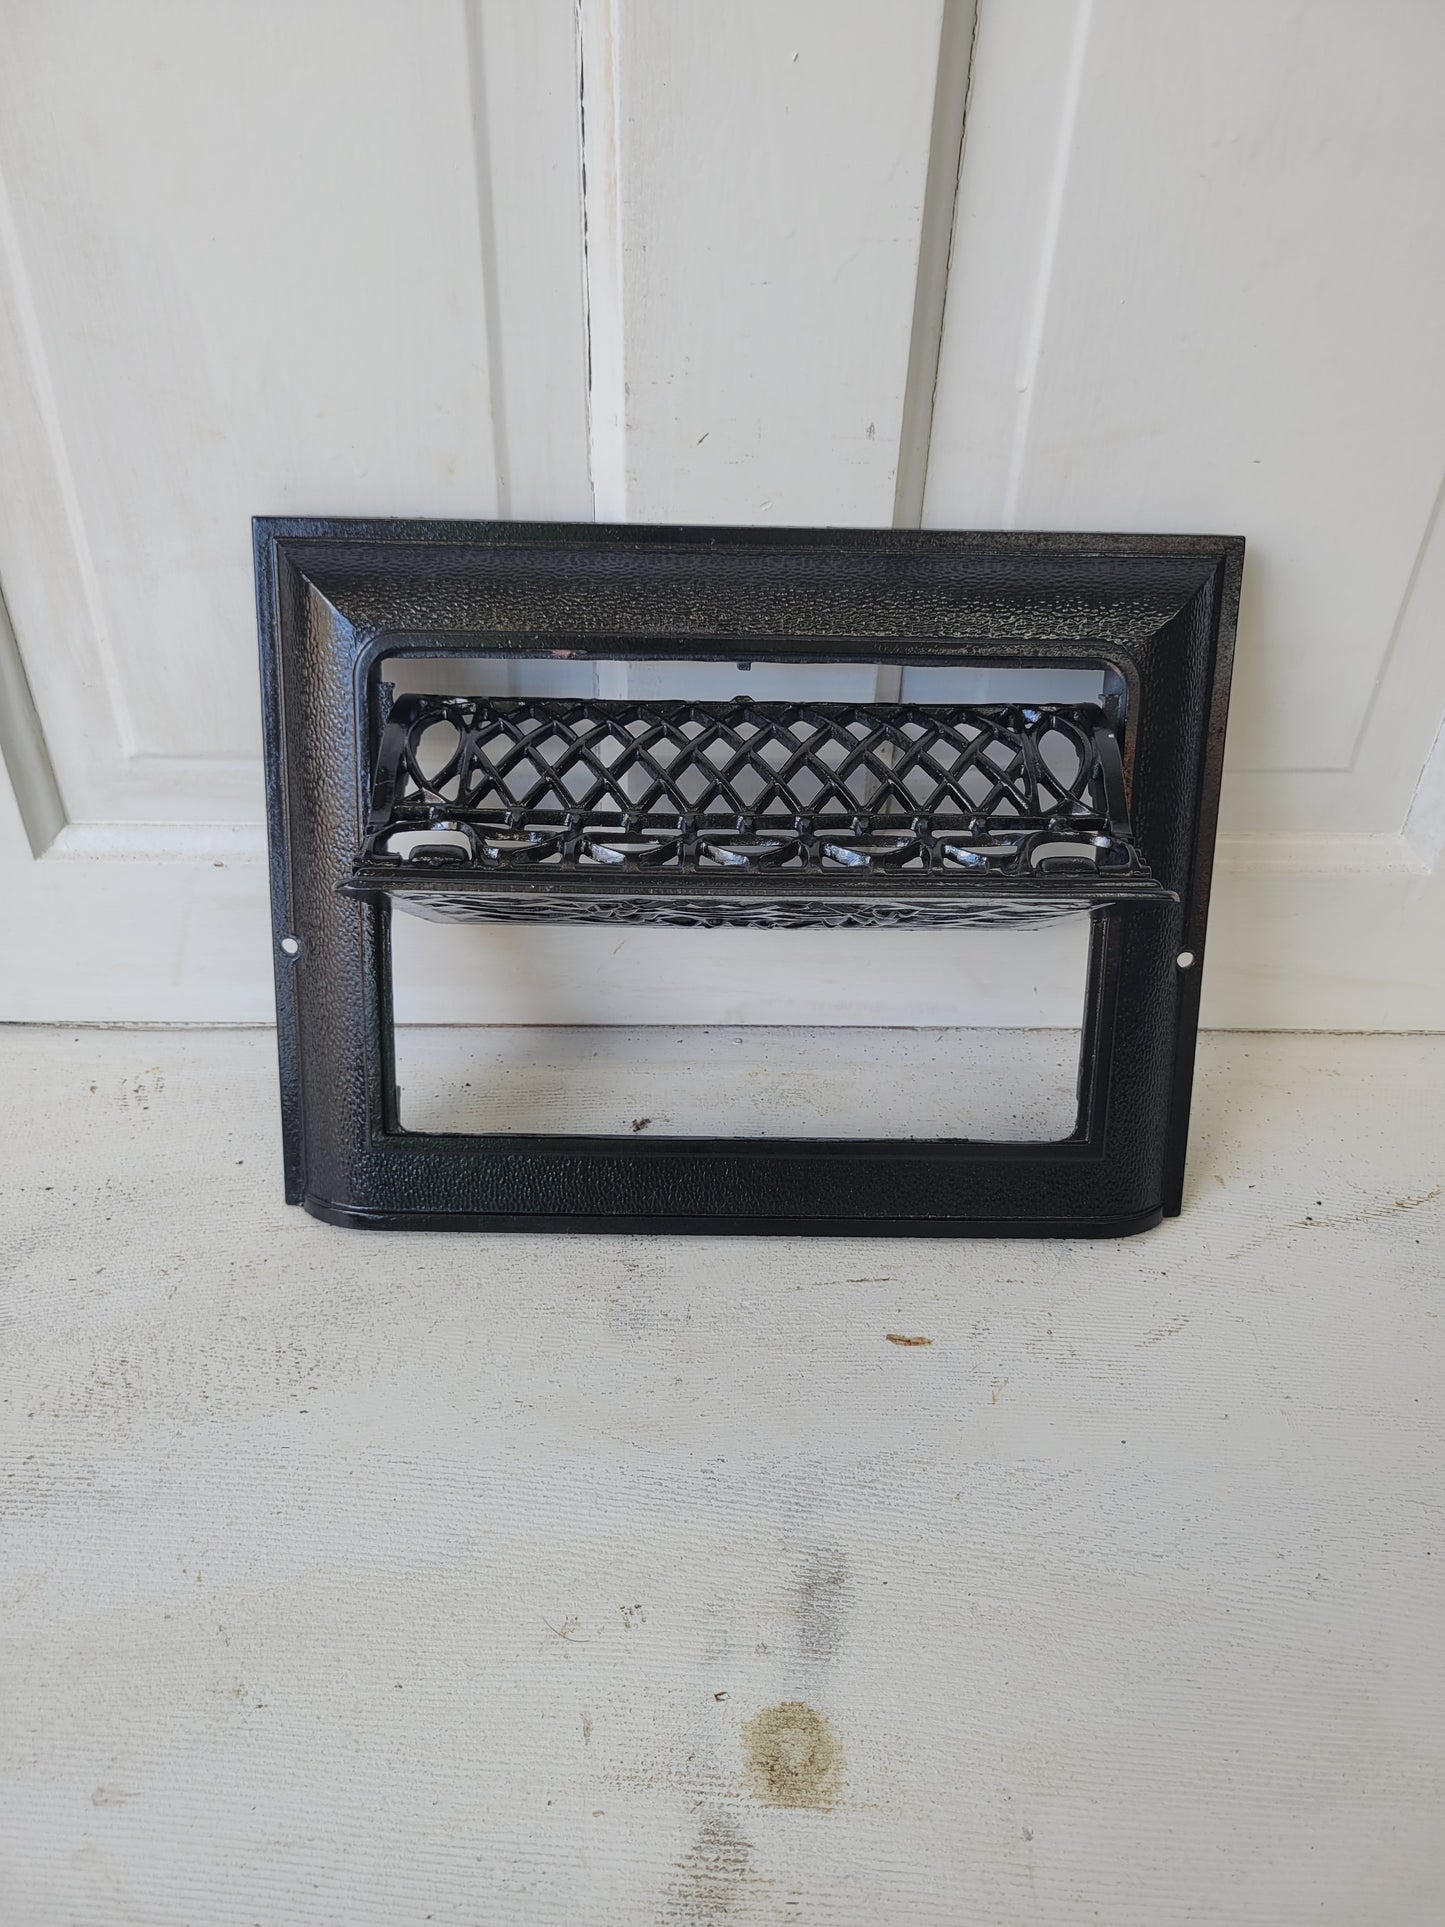 10 x 14 Fancy Cast Iron Fold Out Vent Cover, Antique Floor Register Cover with Dampers #072908